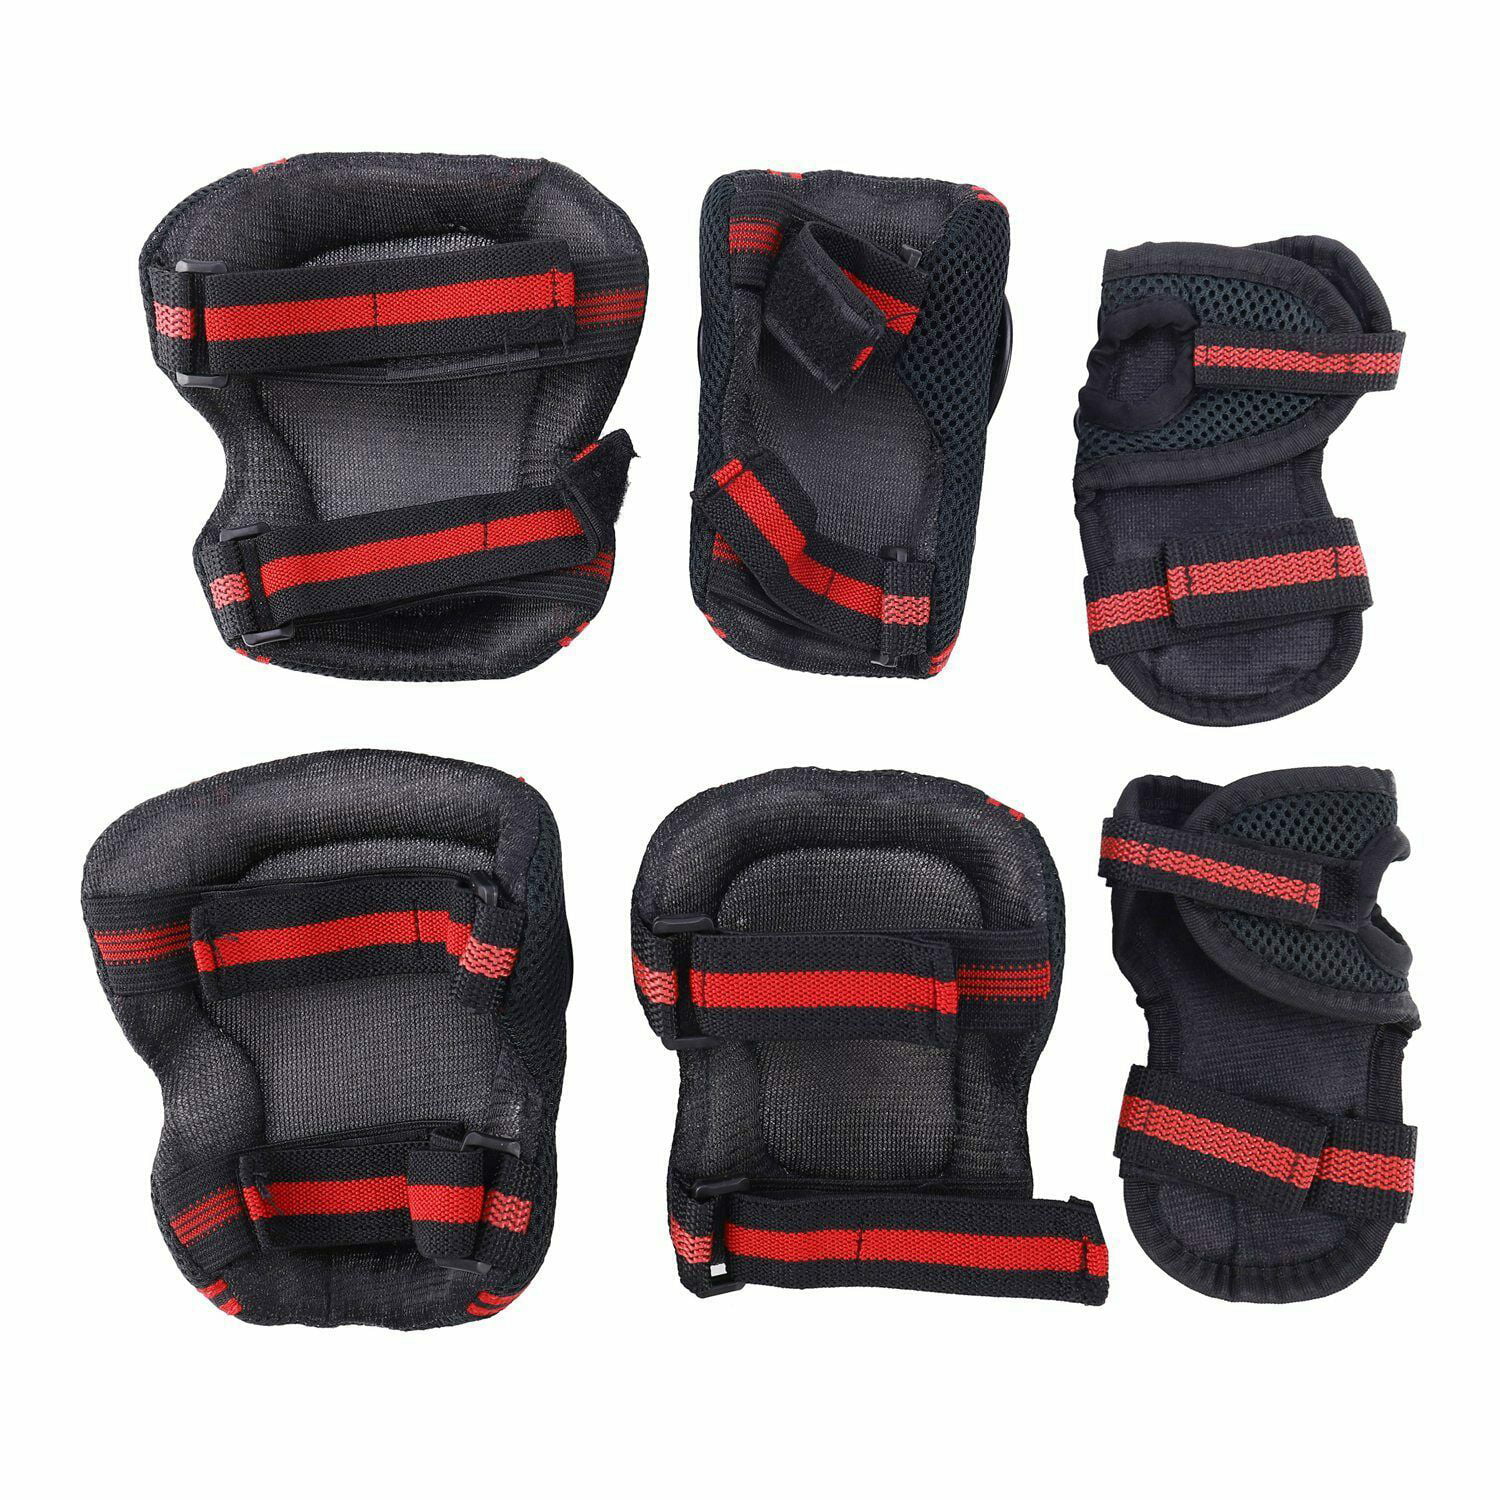 S/M/L ELBOW WRIST PADS SPORTS SAFETY PROTECTIVE GEAR GUARD SKATE CYCLING BIKE 